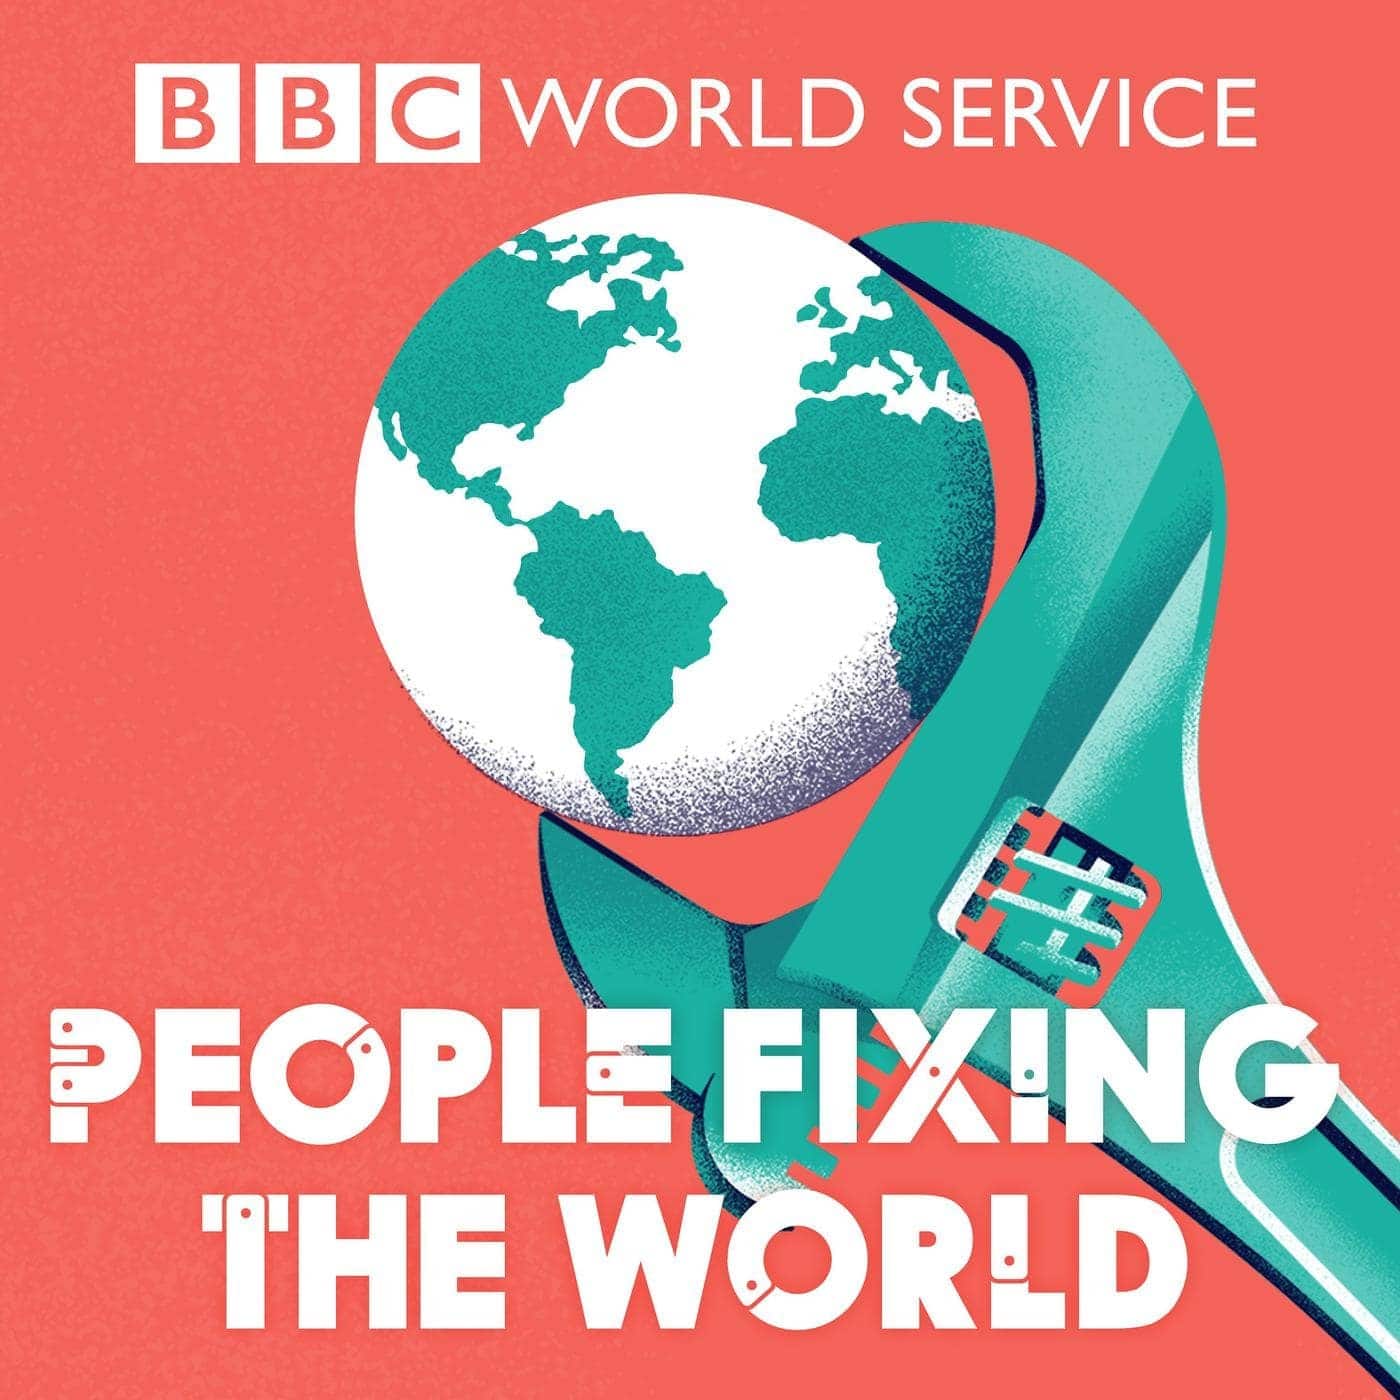 People Fixing the World by British Broadcasting Corporation | podcasts like academy of ideas | life changing podcasts reddit | spotify podcasts that make you think